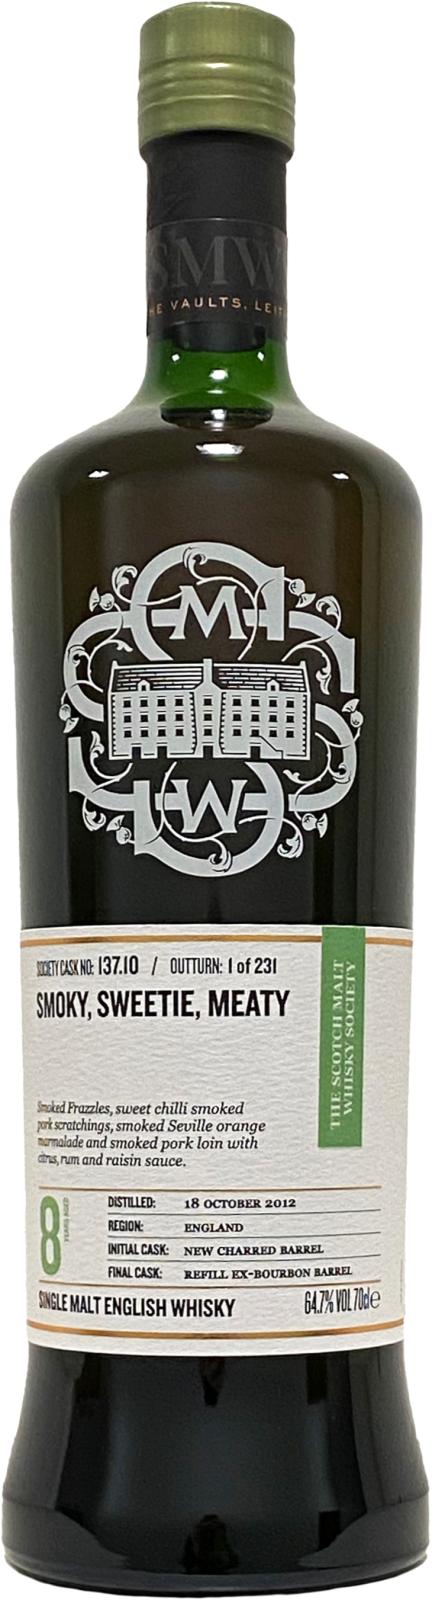 The English Whisky 2012 SMWS 137.10